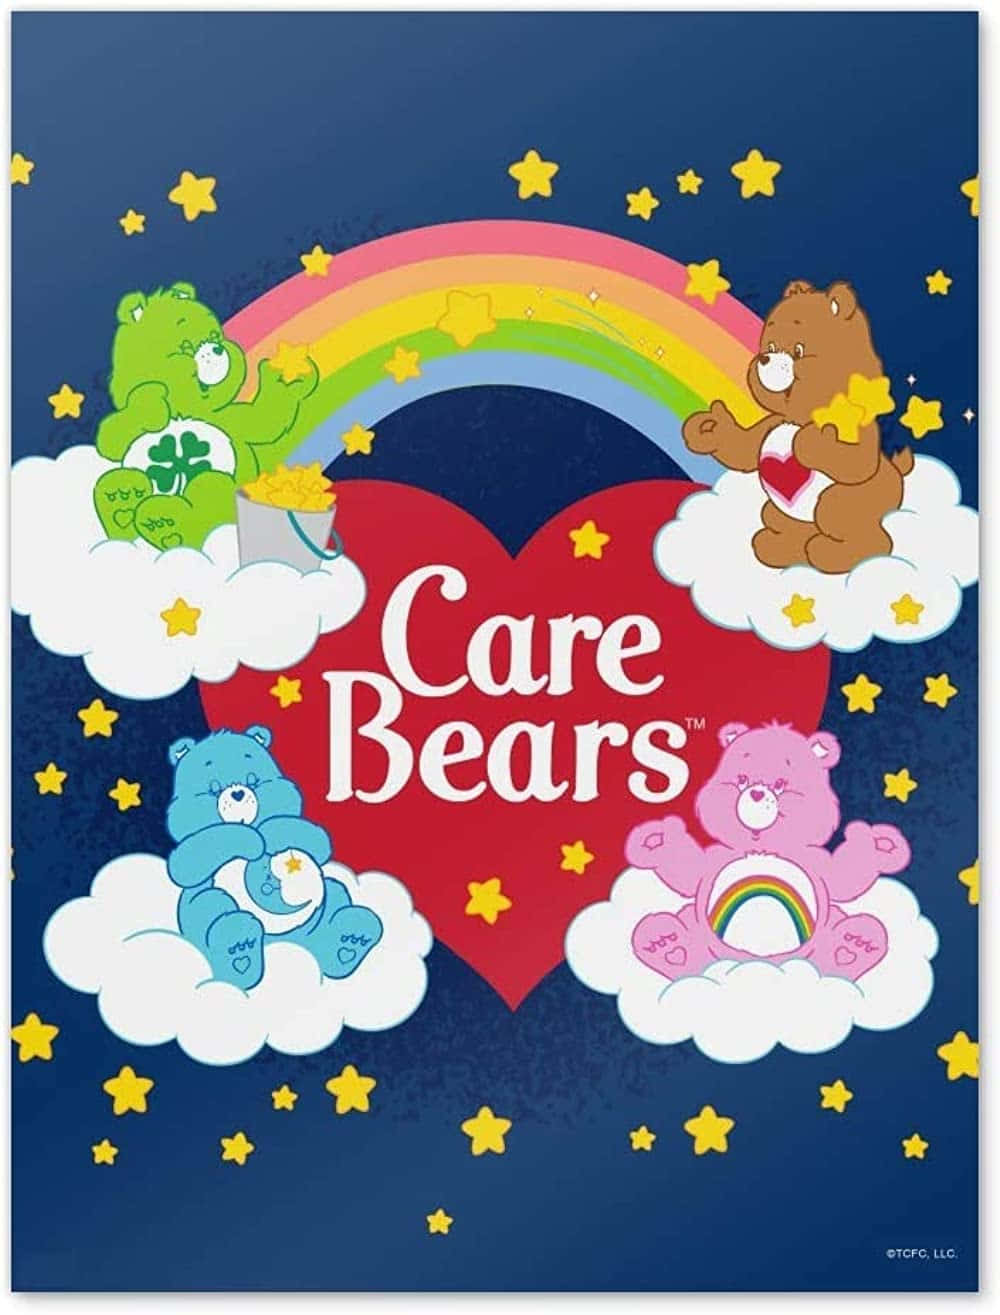 Welcome to the World of Care Bears